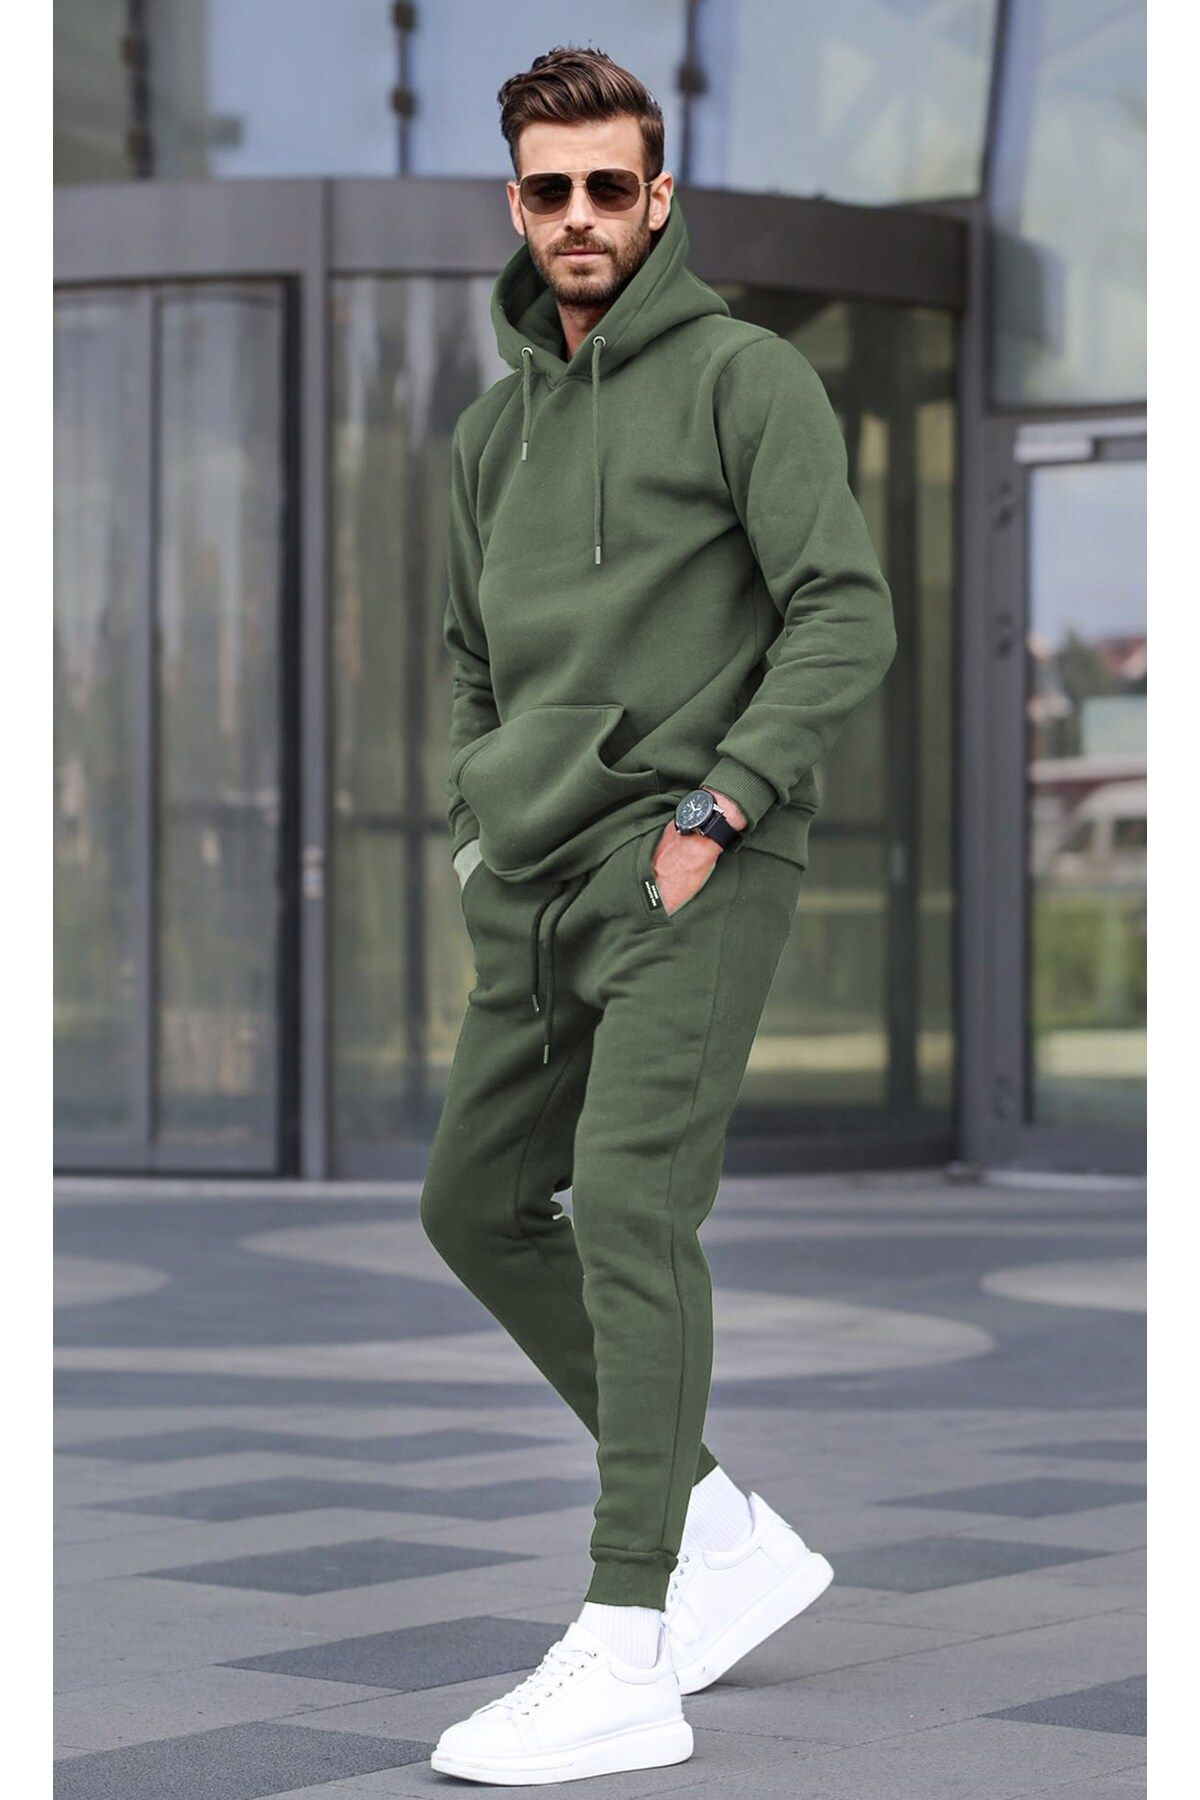 Kayannuo Sweat Pants for Men Spring Clearance Men Casual Solid